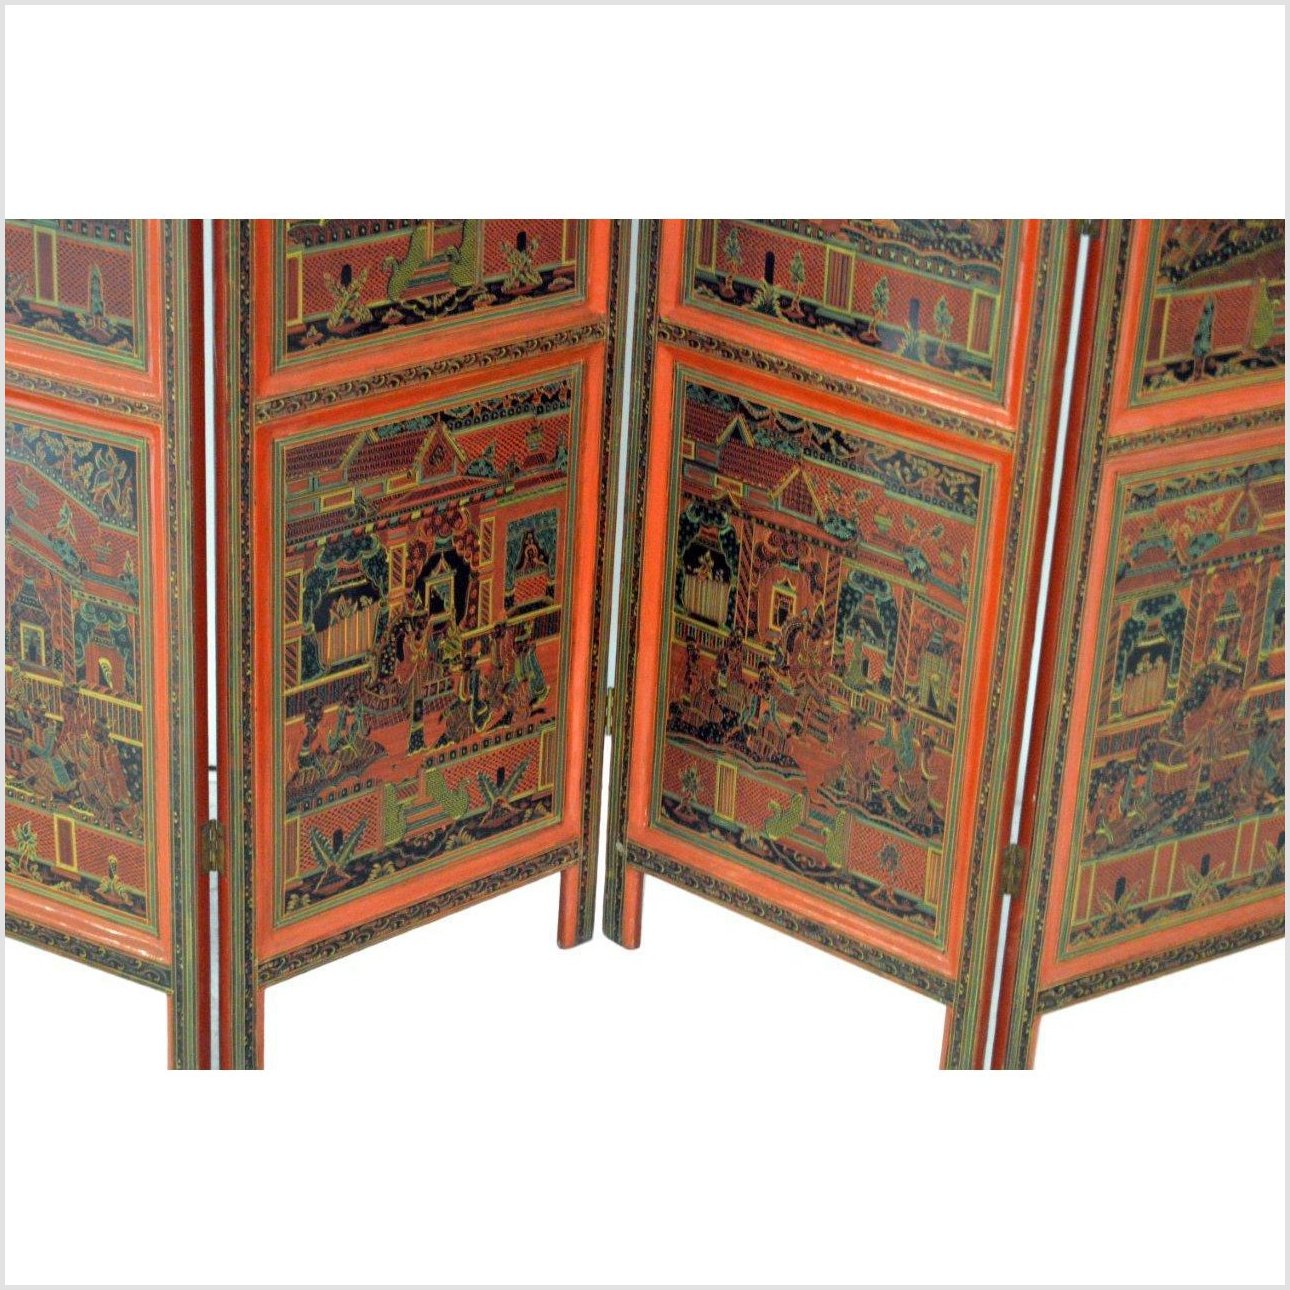 4-Panel Middle Eastern Art Inspired Screen-YN2844-7. Asian & Chinese Furniture, Art, Antiques, Vintage Home Décor for sale at FEA Home